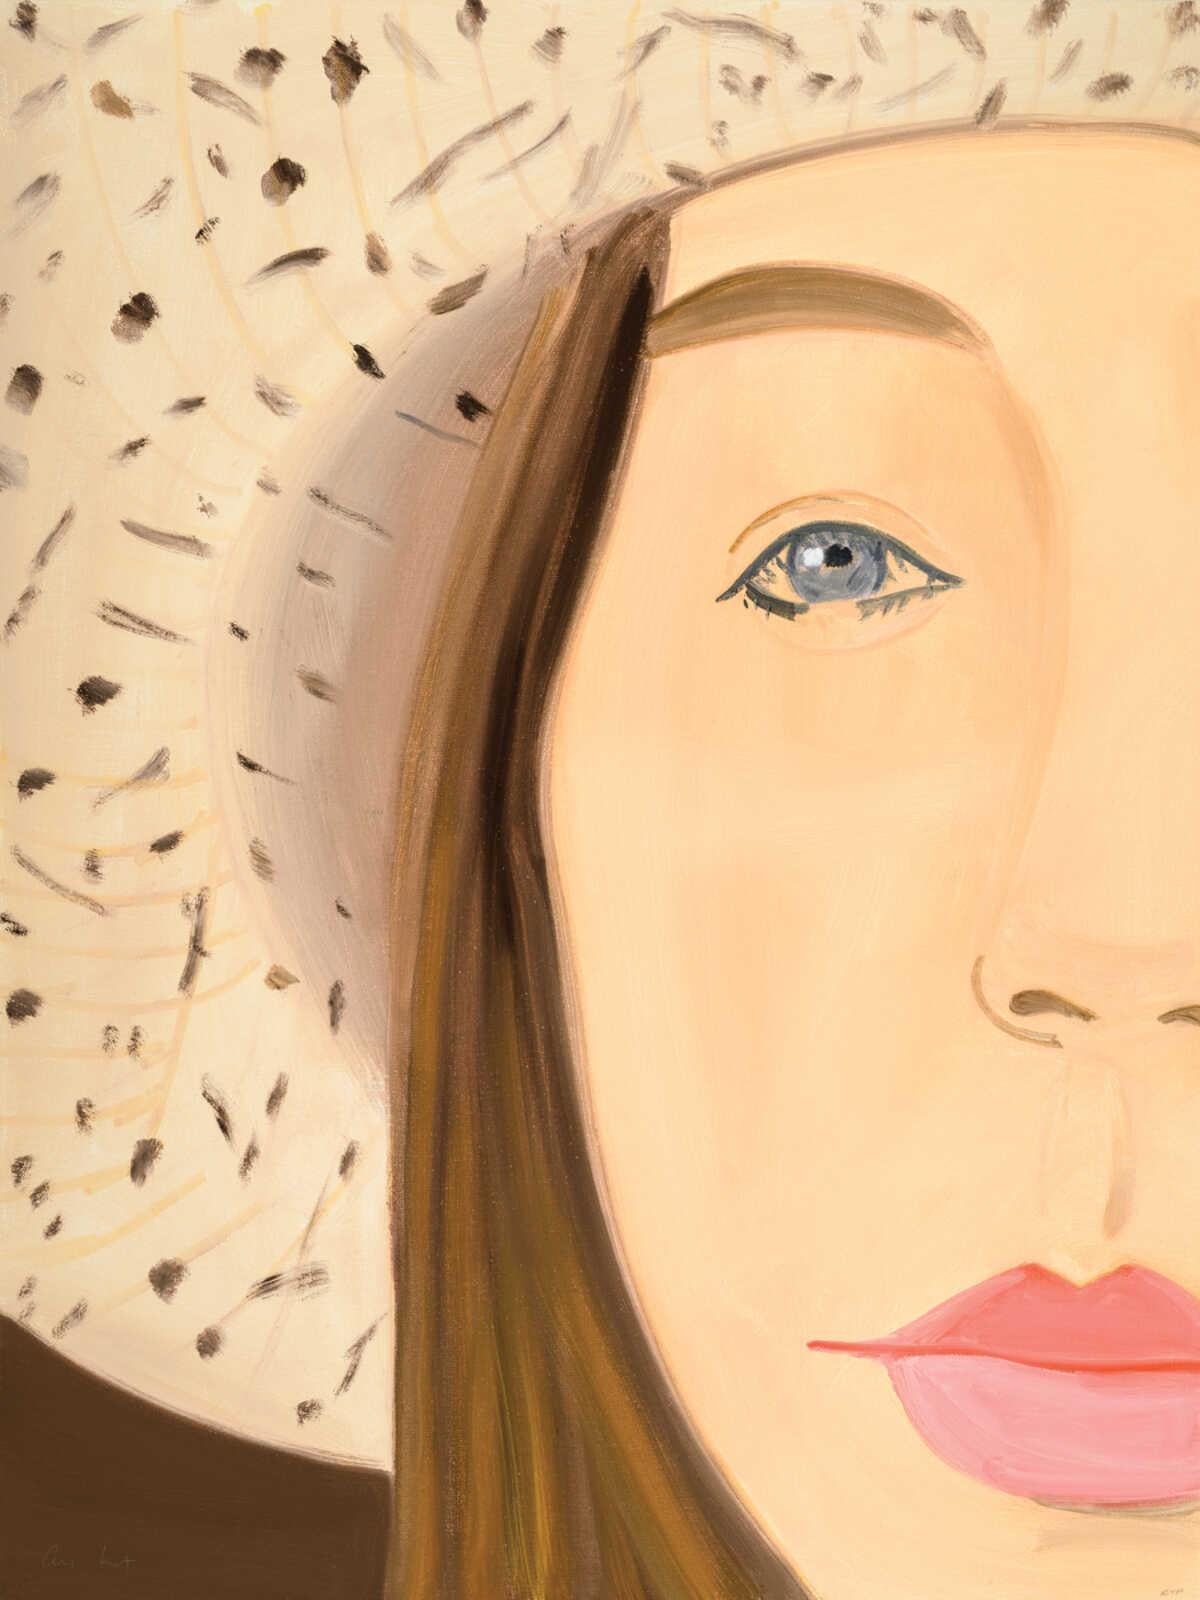 Straw Hat 2 by Alex Katz is an archival pigment ink etching on Innova Etching Cotton Rag 315 gsm fine art paper. Created in 2020, the piece is Signed and Numbered by the artist in pencil. The artwork is an extremely limited edition, directly from